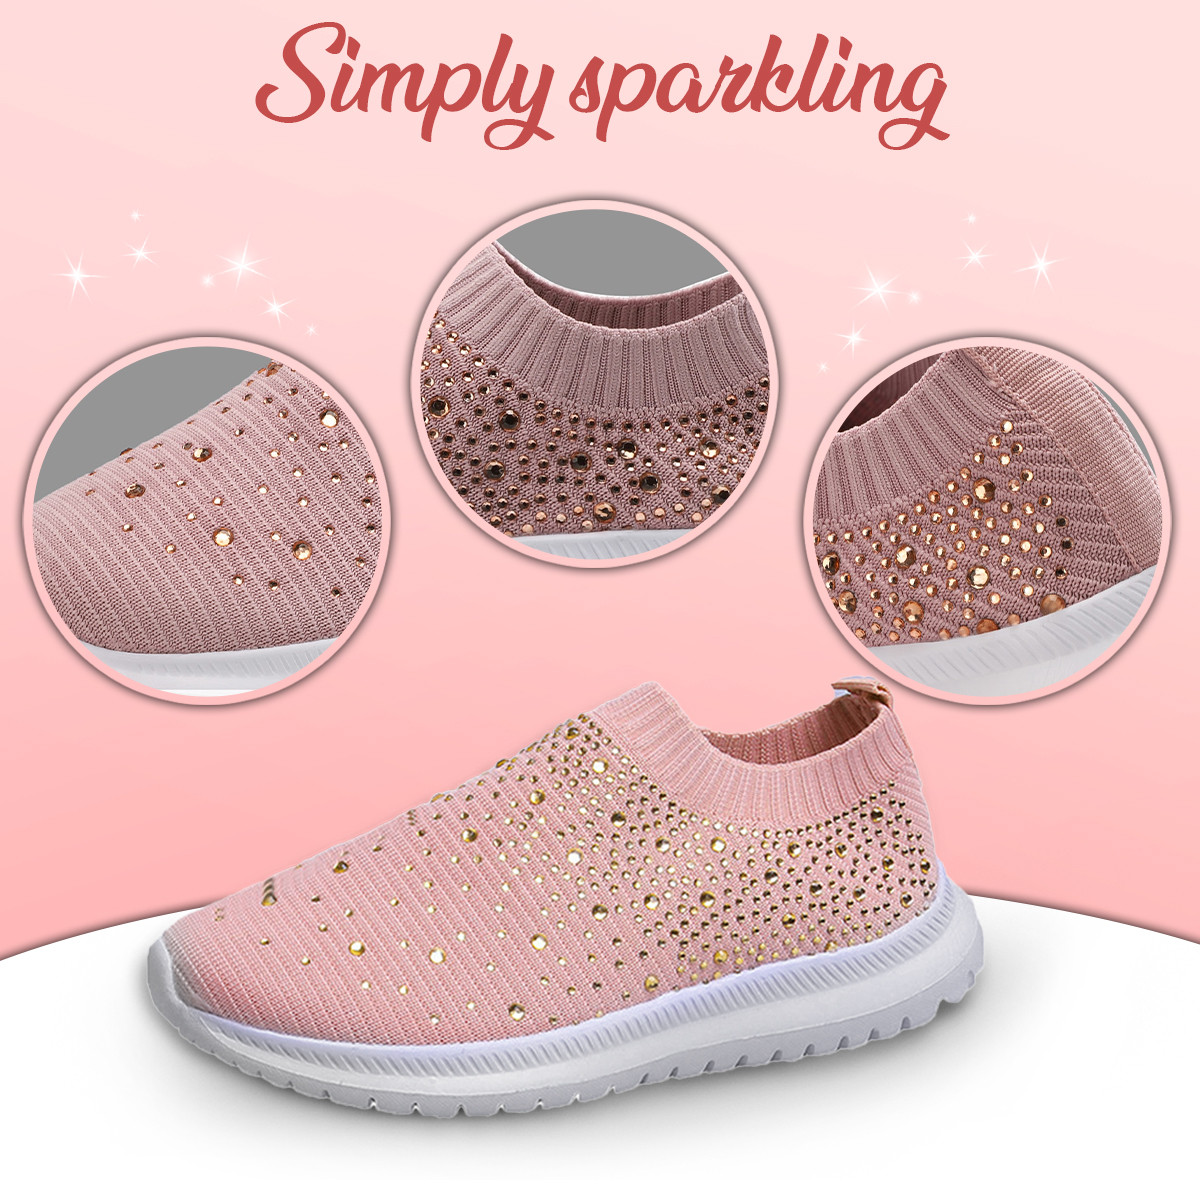 Women's Support & Breathable Sparkly Walking Shoes - Fancy Wiz